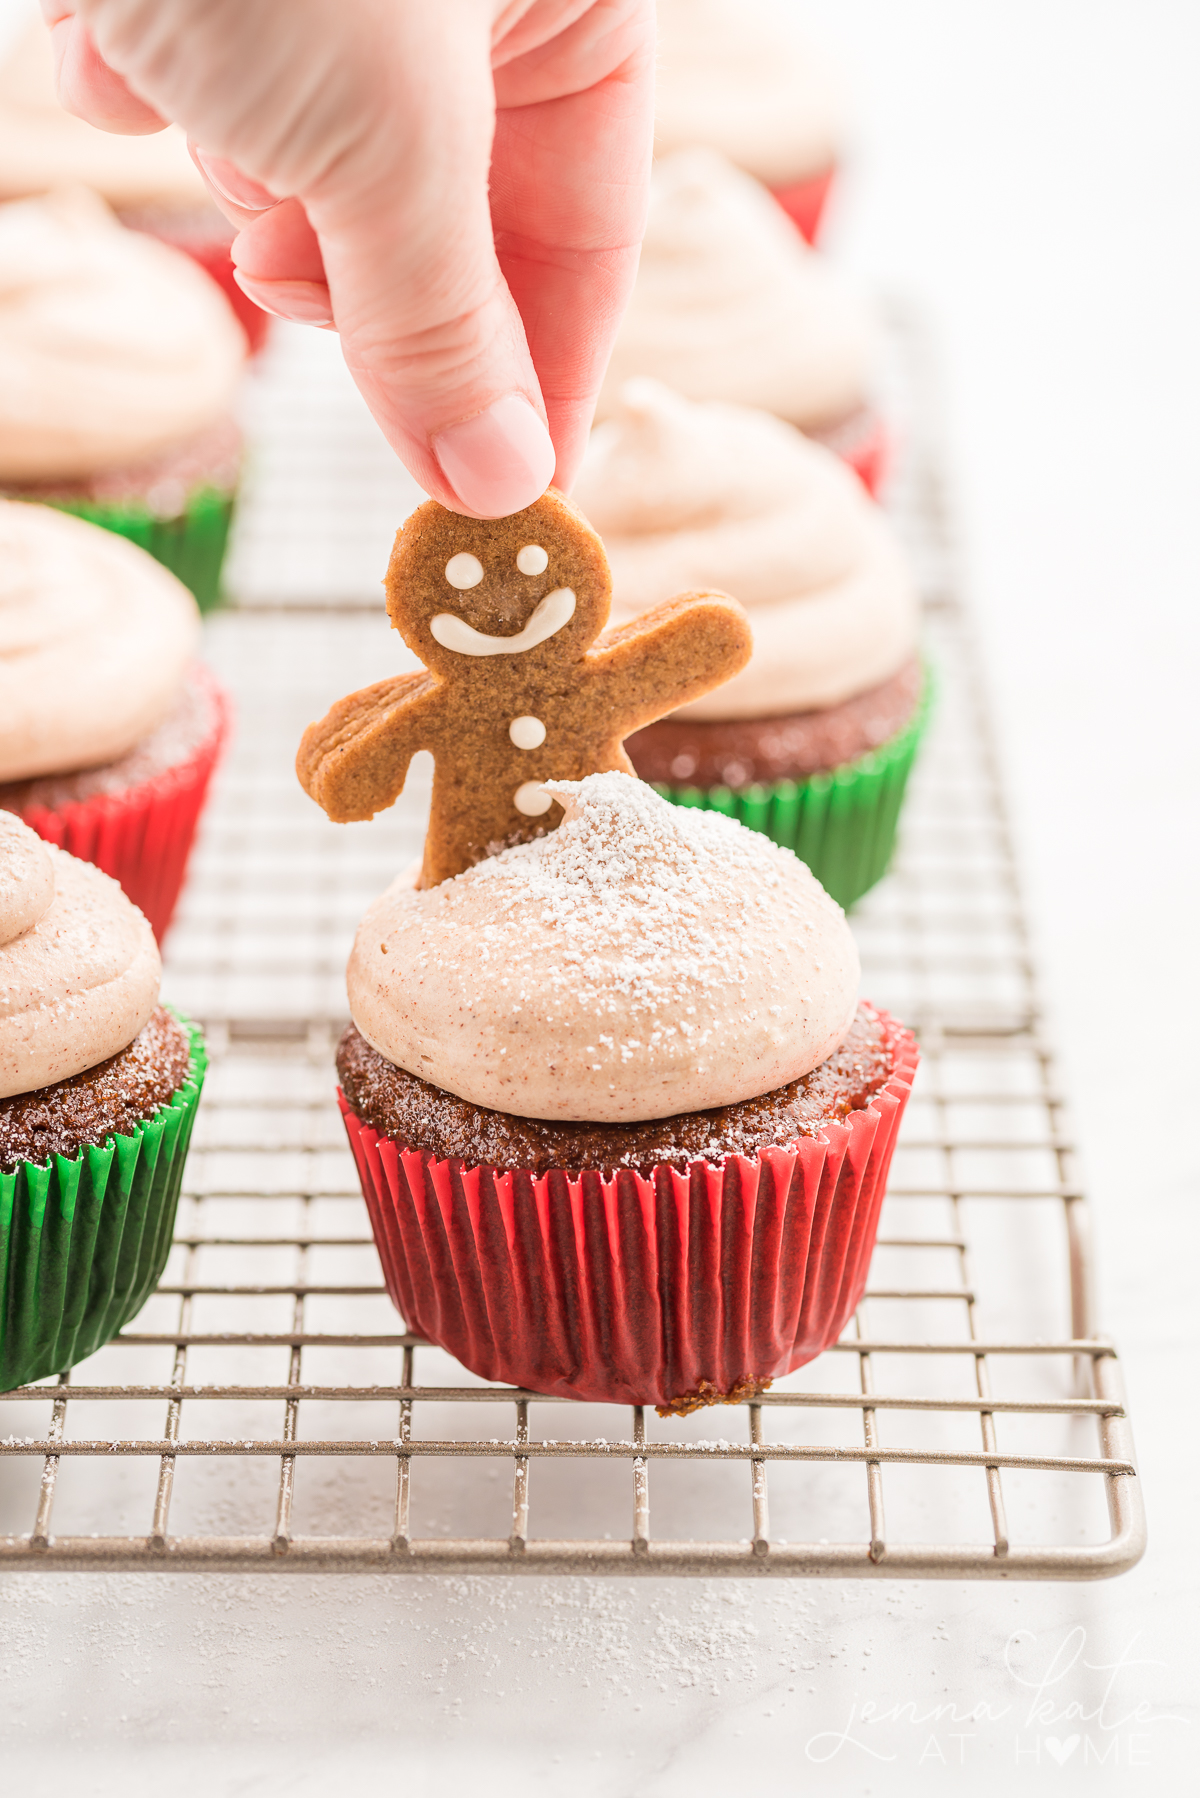 placing a gingerbread man into the top of one of the cupcakes